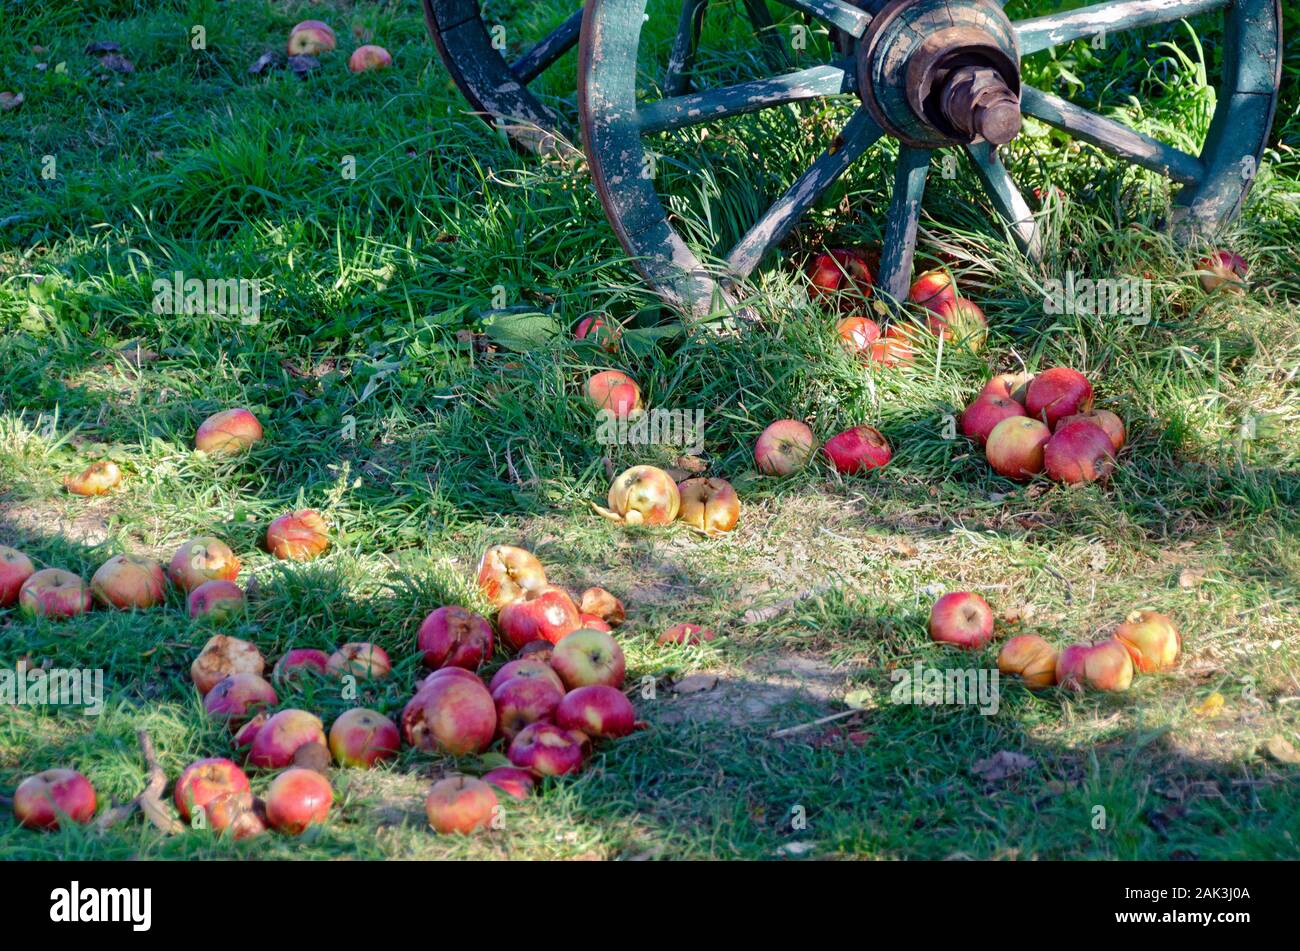 Partly rotten colorful apples falling from a tree lying in green grass before an old wooden wheel Stock Photo